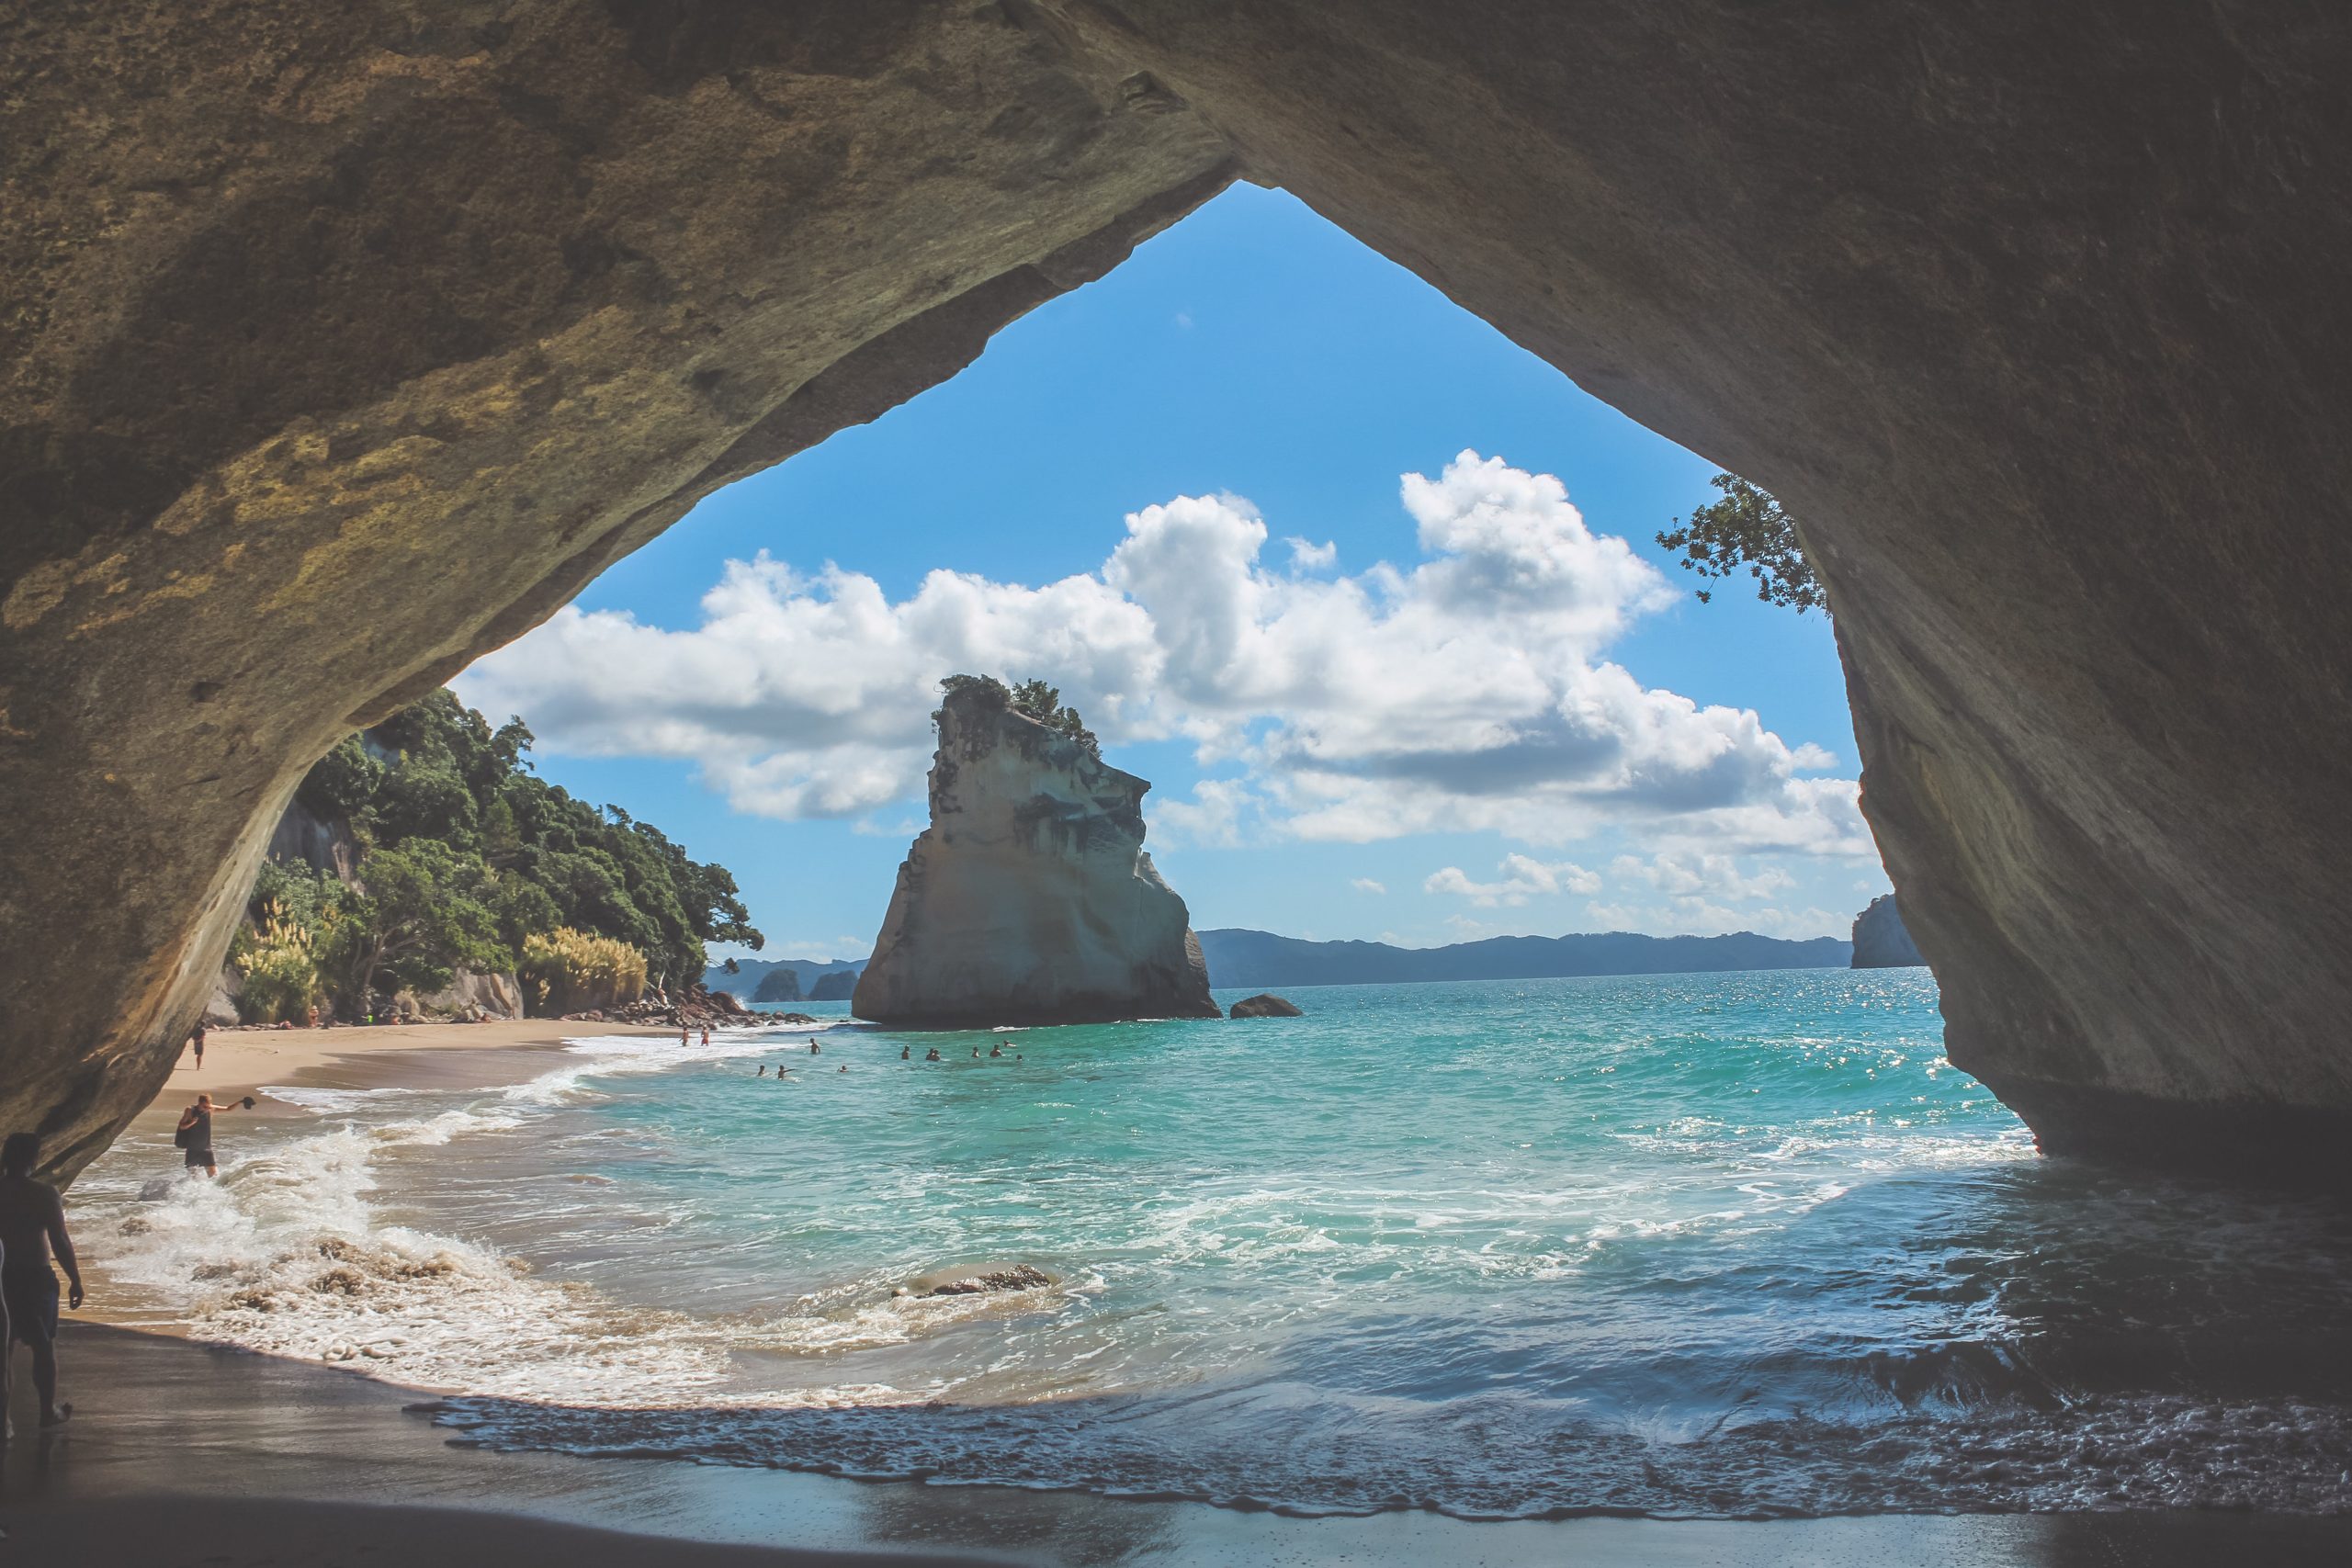 The view of a golden sandy cove with blue ocean and a large rock, seen through a natural stone archway.